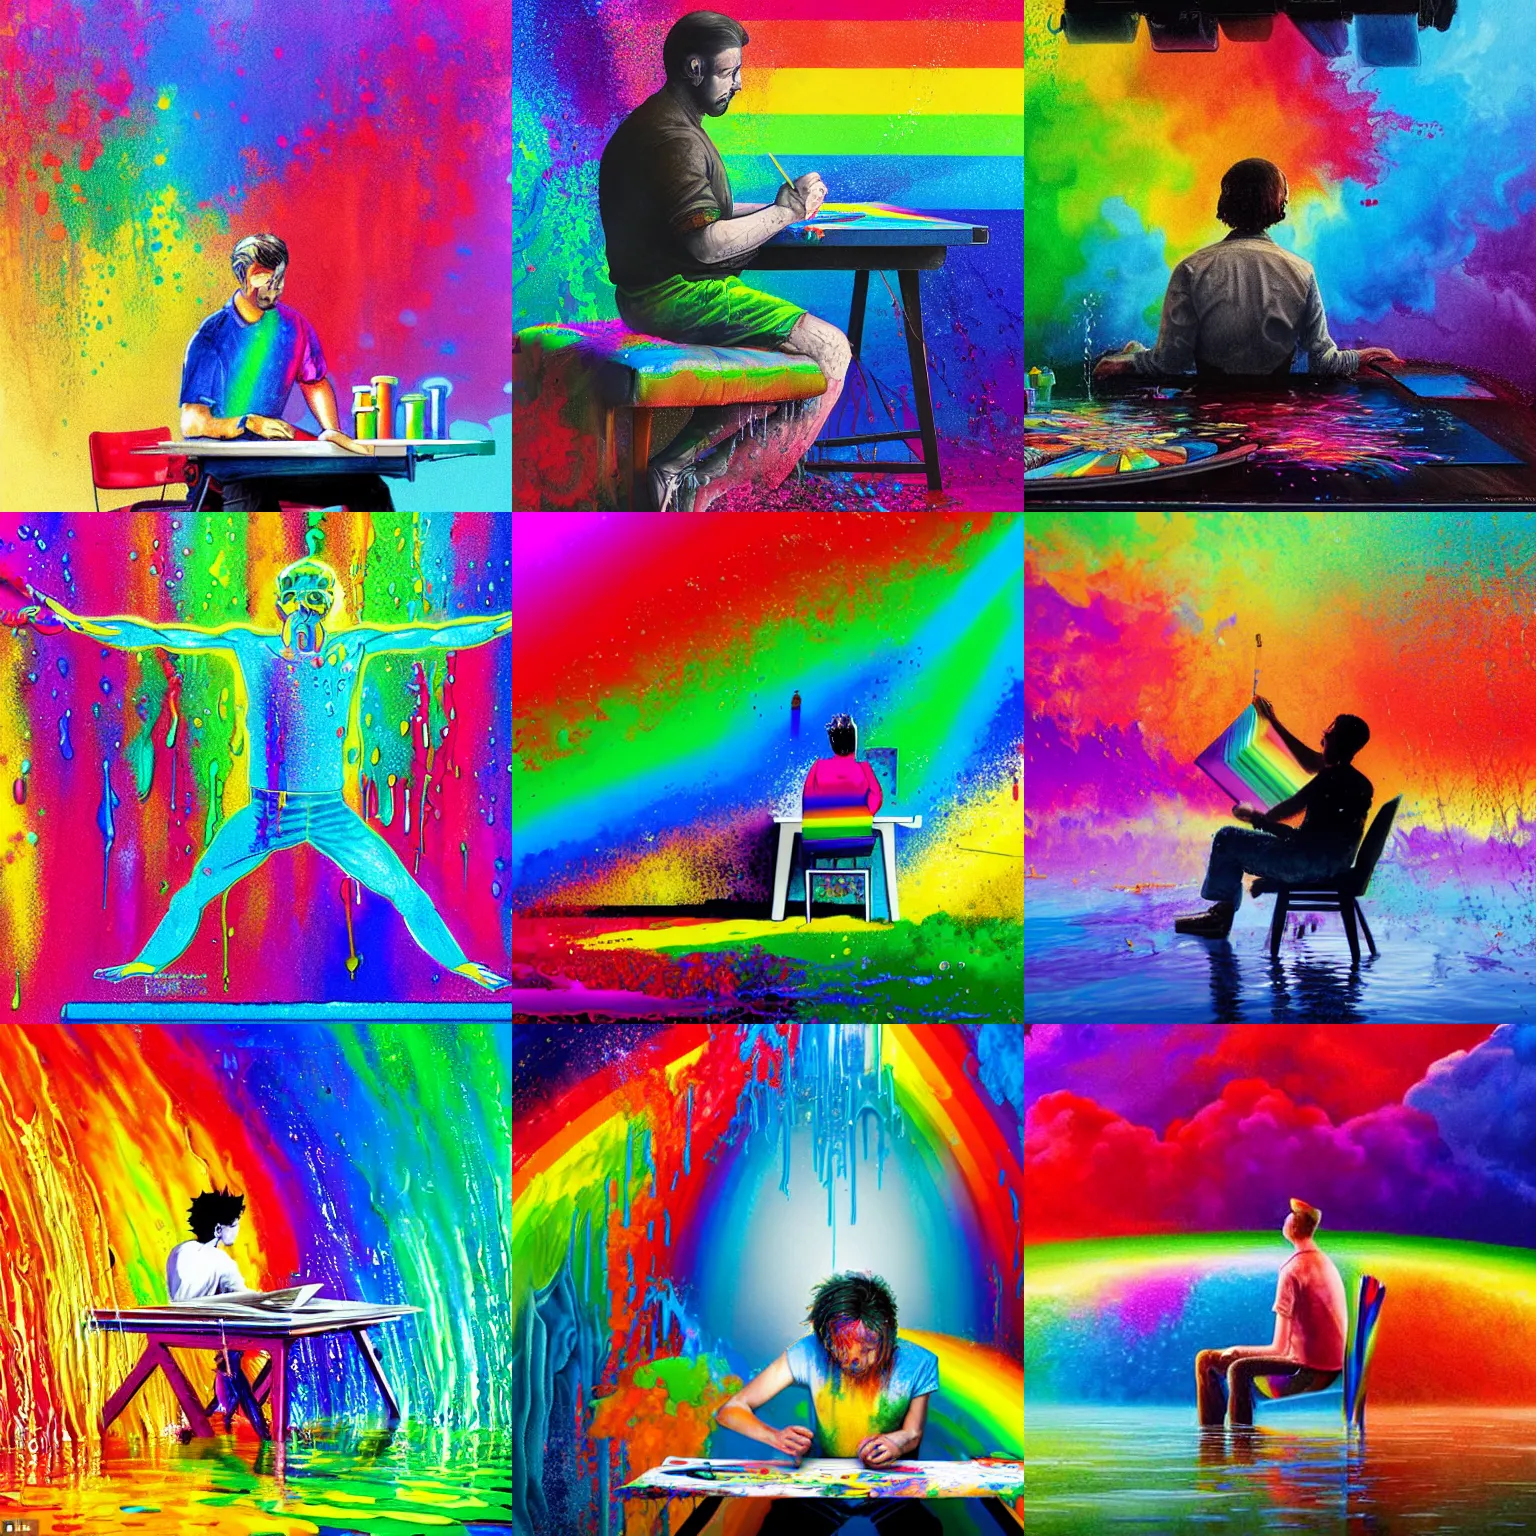 Prompt: an artist sits at a drafting table. his legs are submerged in rainbow fluid. the room is flooded with rainbow fluid. the artists canvas is blank. atmospheric award winning illustration by a famous illustrator